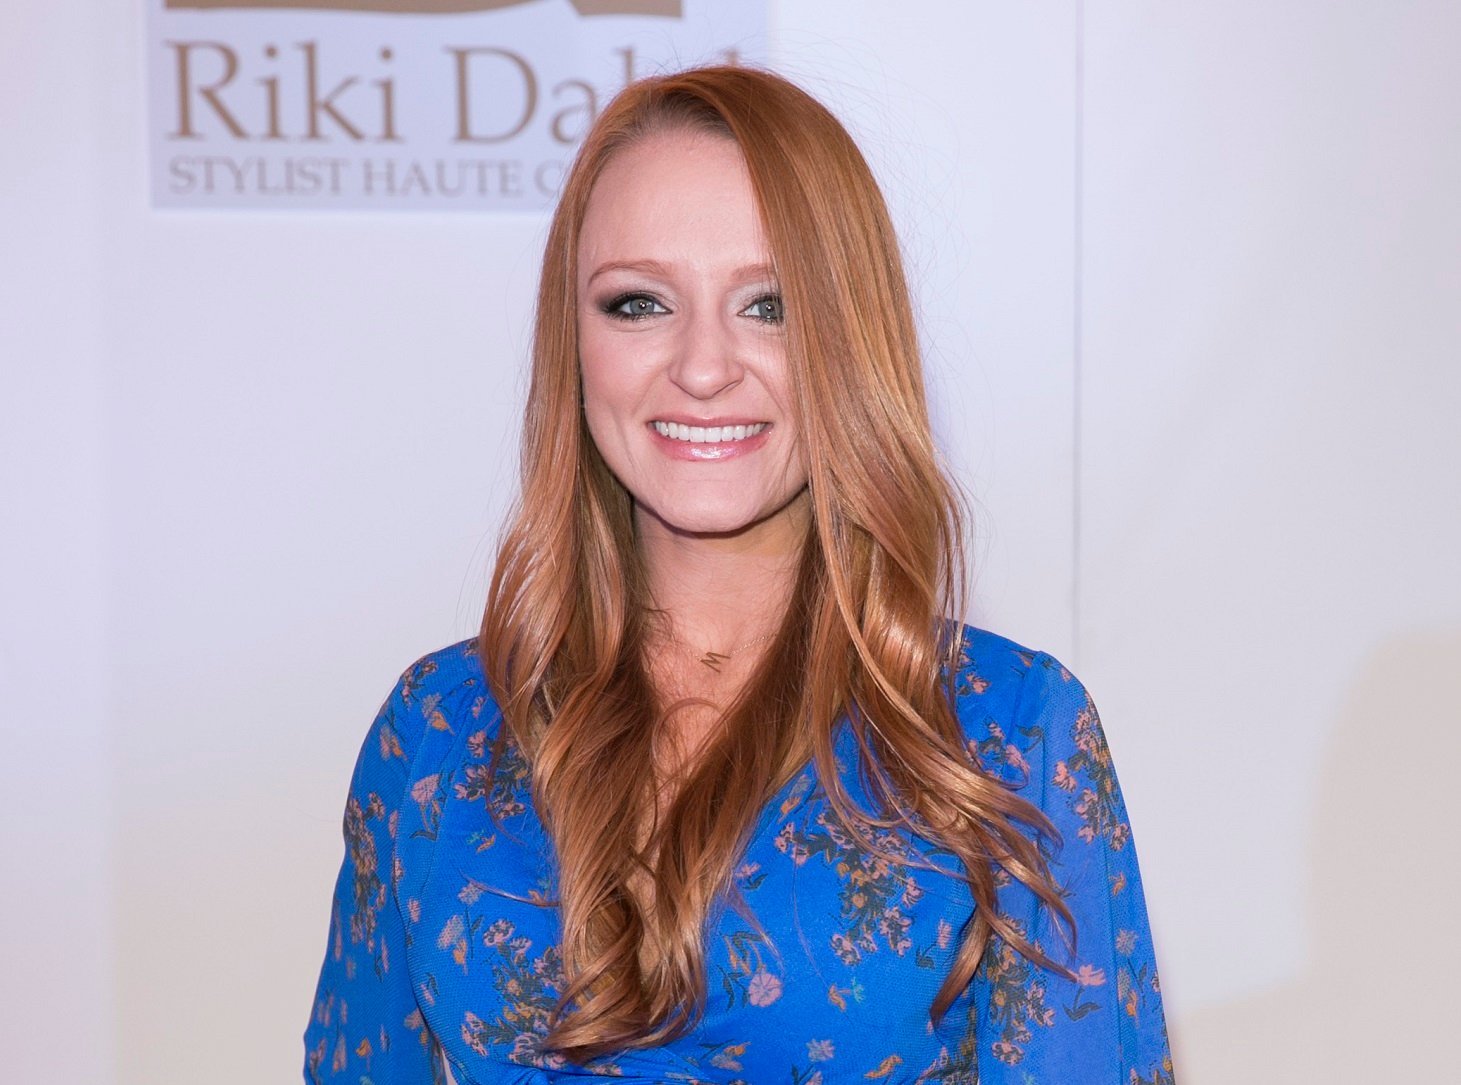 Maci Bookout smiles at the camera while wearing a blue dress with flowers on it